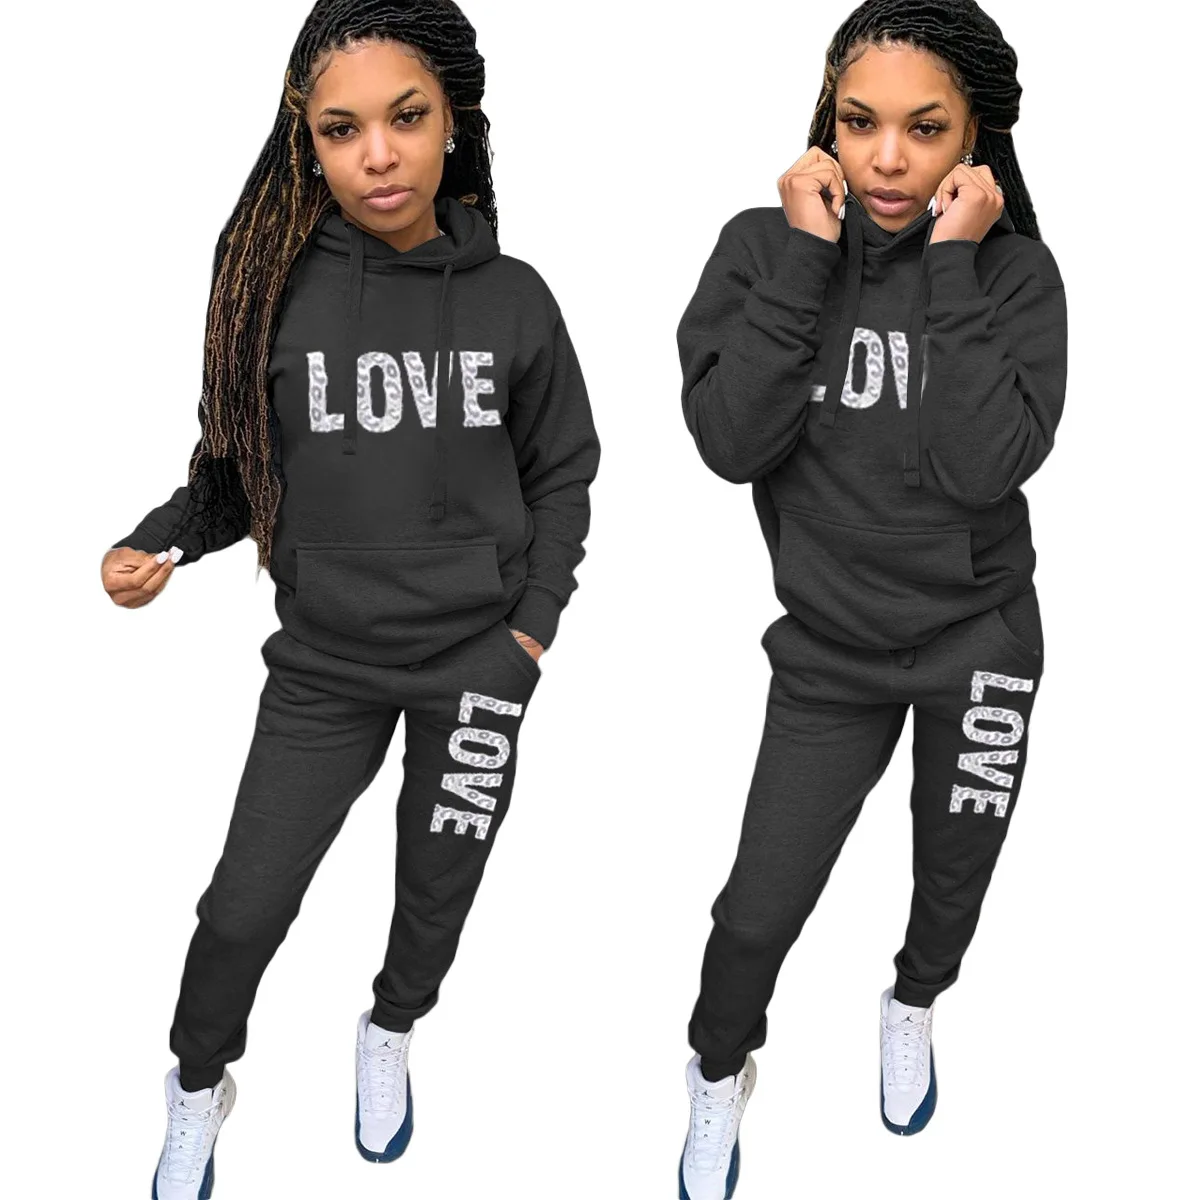 

CL-029 Winter Fall Thicken Black 2021 Cotton Polyester Women Sportswear Womens Two Piece Hoodie Set, As picture show